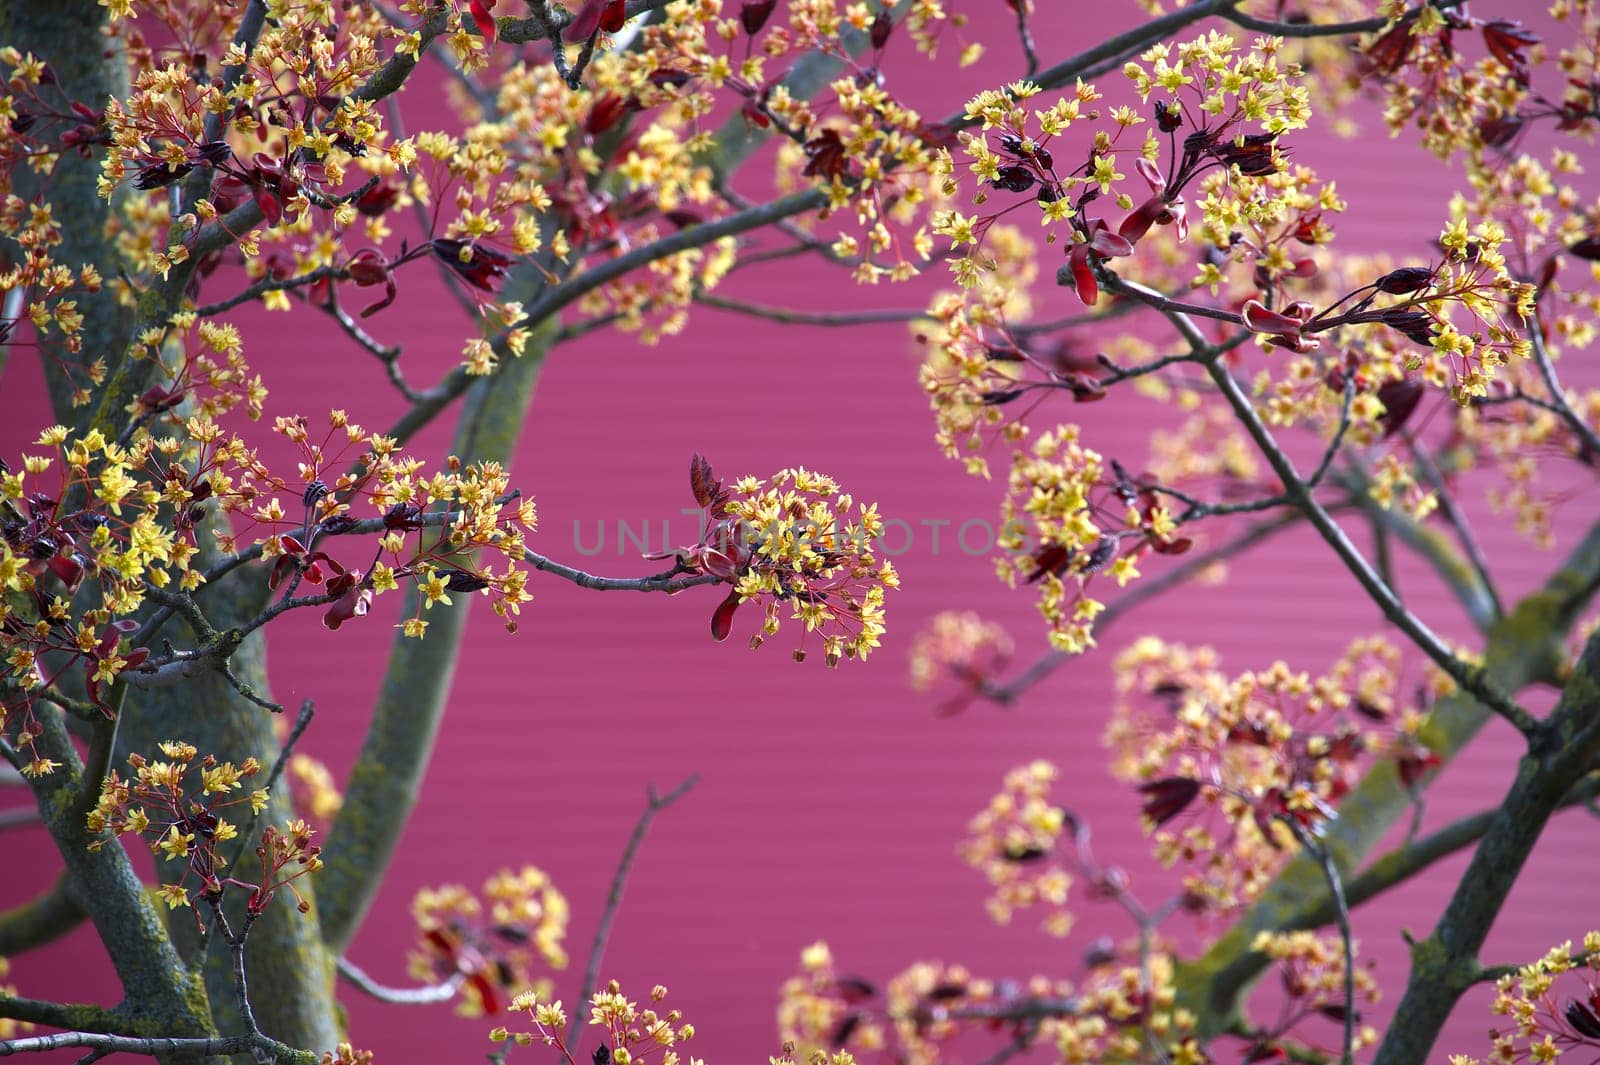 Red maple female tree covered with small yellow blossoms by NetPix